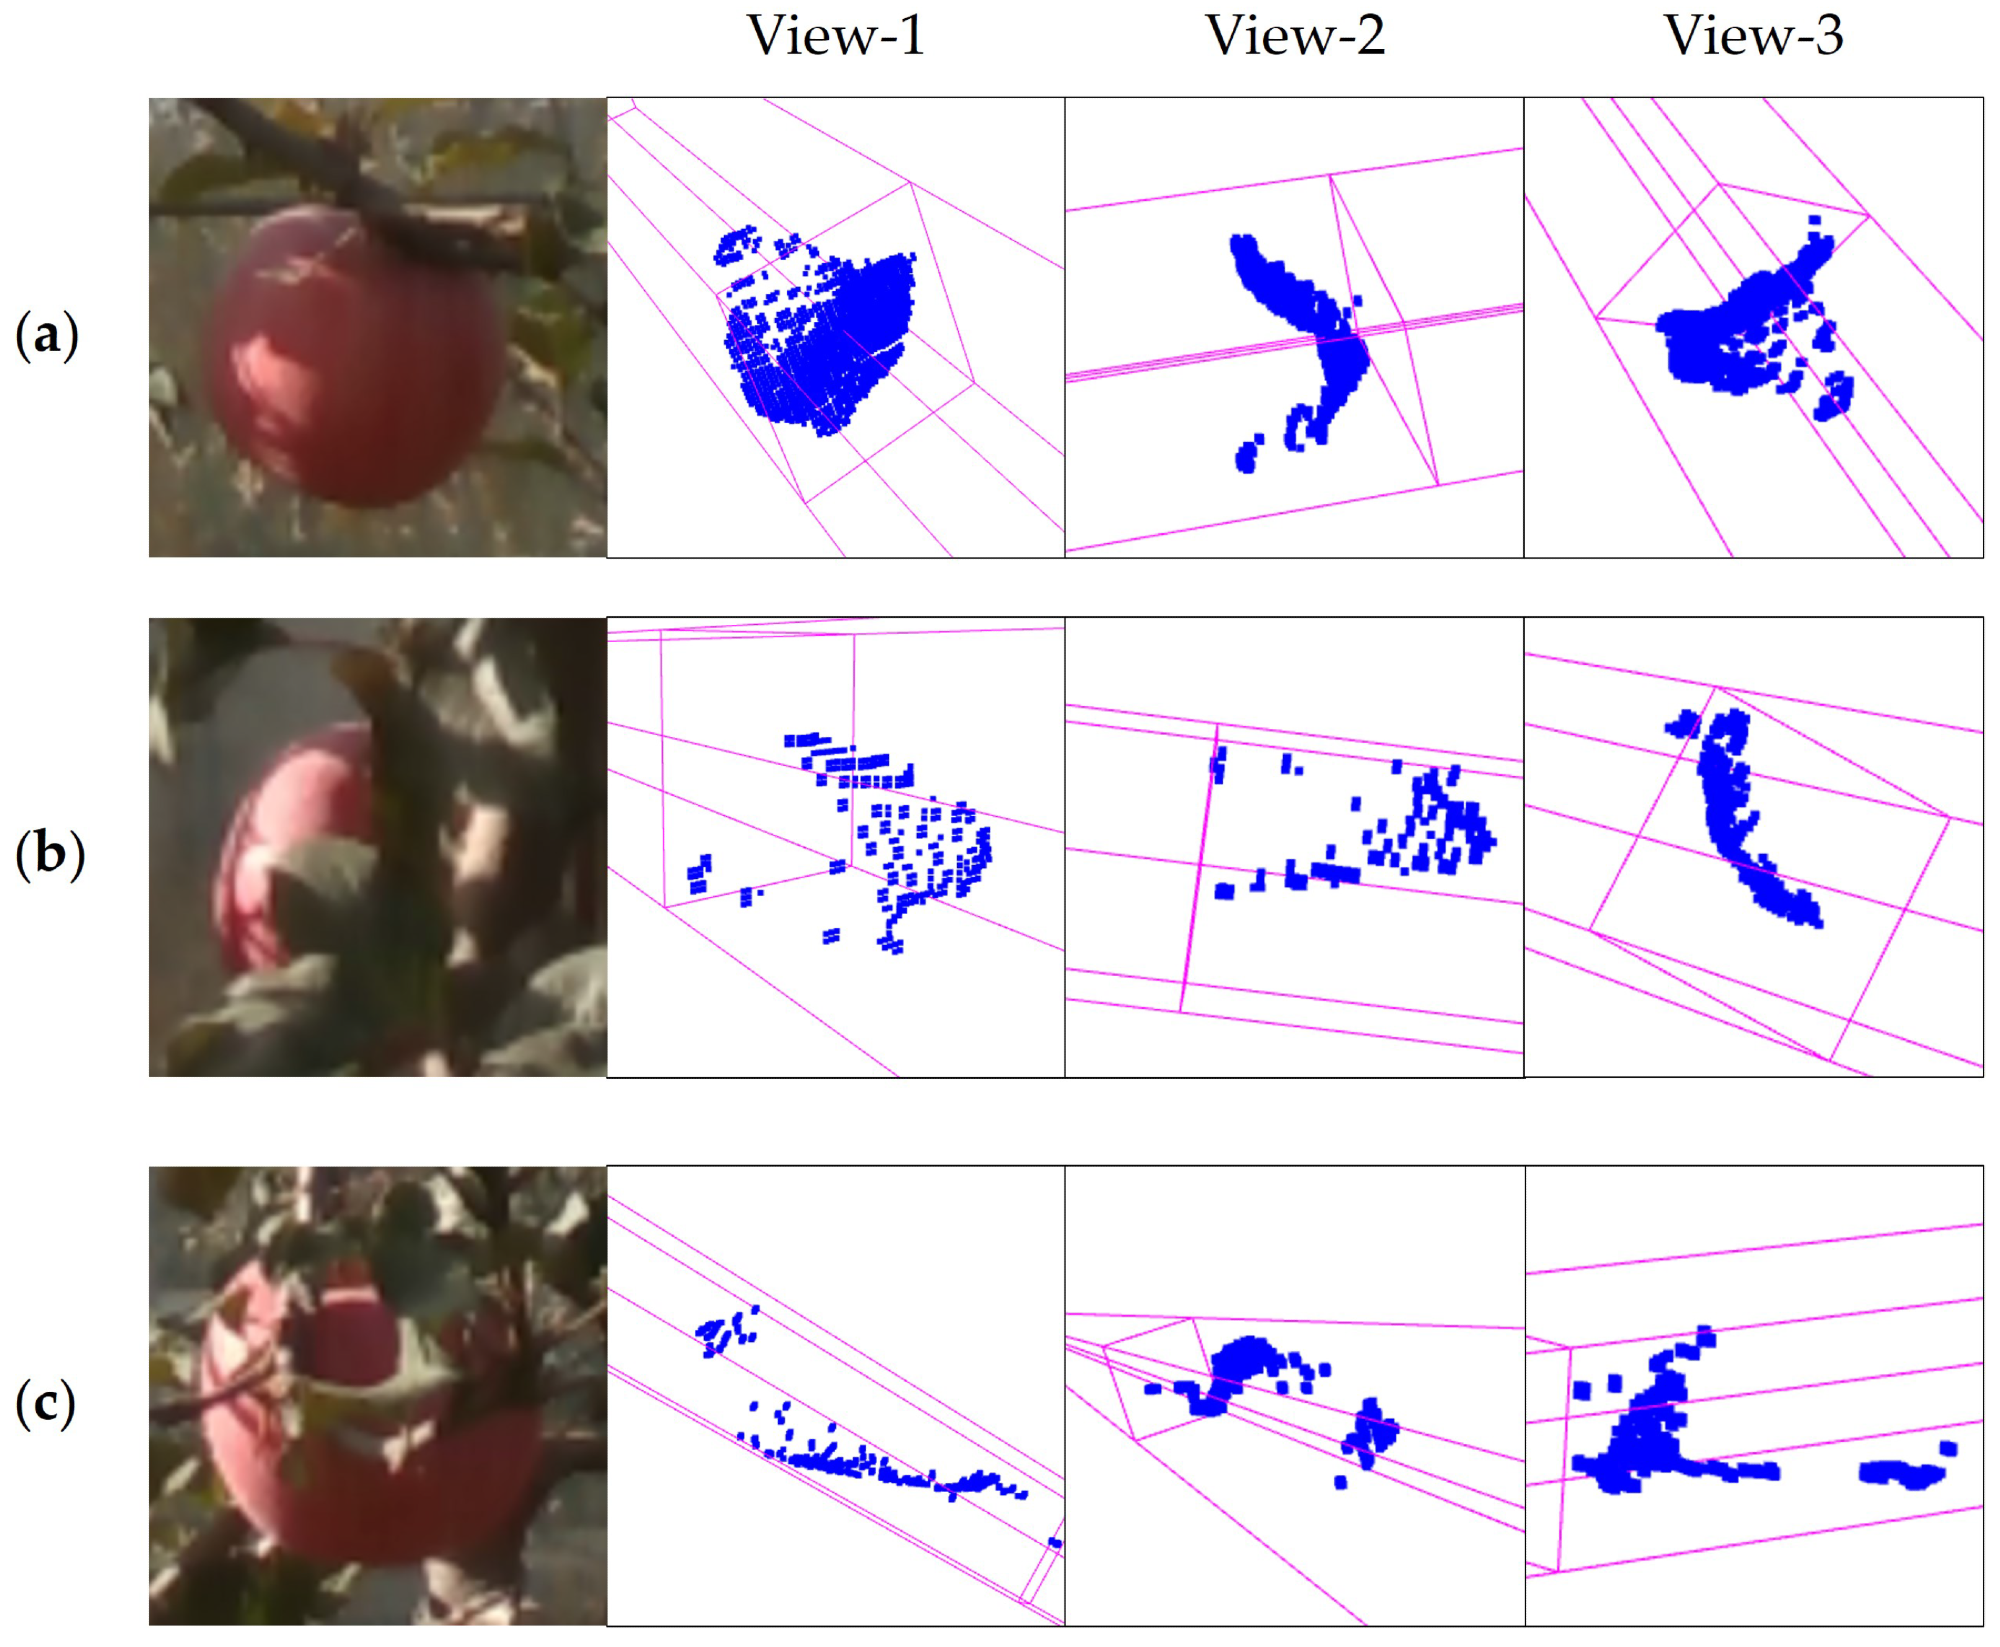 Distortion and fragments of the targets’ point clouds. (a) Non-occluded fruits’ point clouds with little distortion and good completeness; (b) leaf-occluded fruits’ point clouds with considerable distortion and good completeness; (c) leaf-occluded fruits’ point clouds with considerable distortion and fragments.